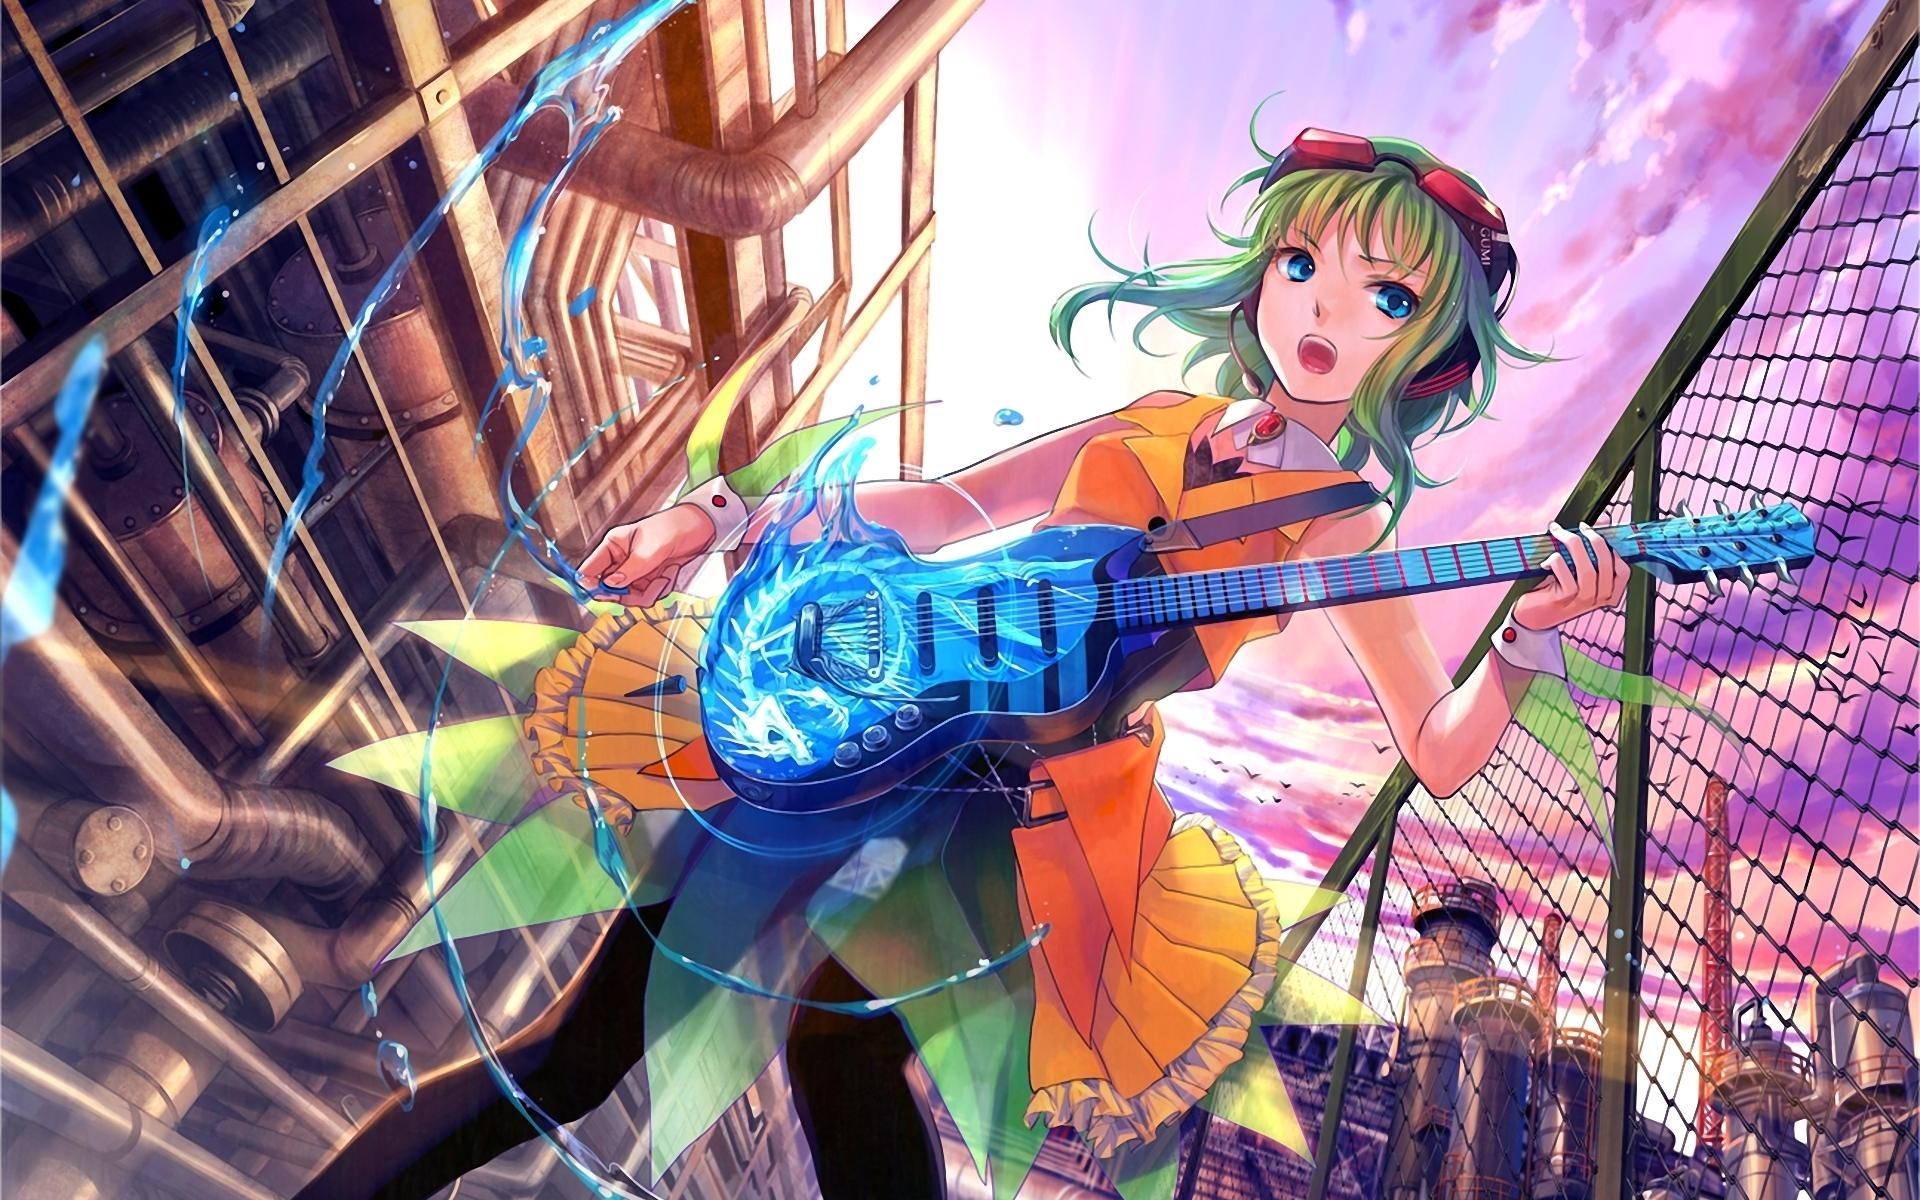 Free Download Anime Girl With Guitar Wallpaper Android Wallpaper Wallpaper 19x10 For Your Desktop Mobile Tablet Explore 49 Android Girl Wallpaper Android Wallpapers Hd Free Wallpaper For Android